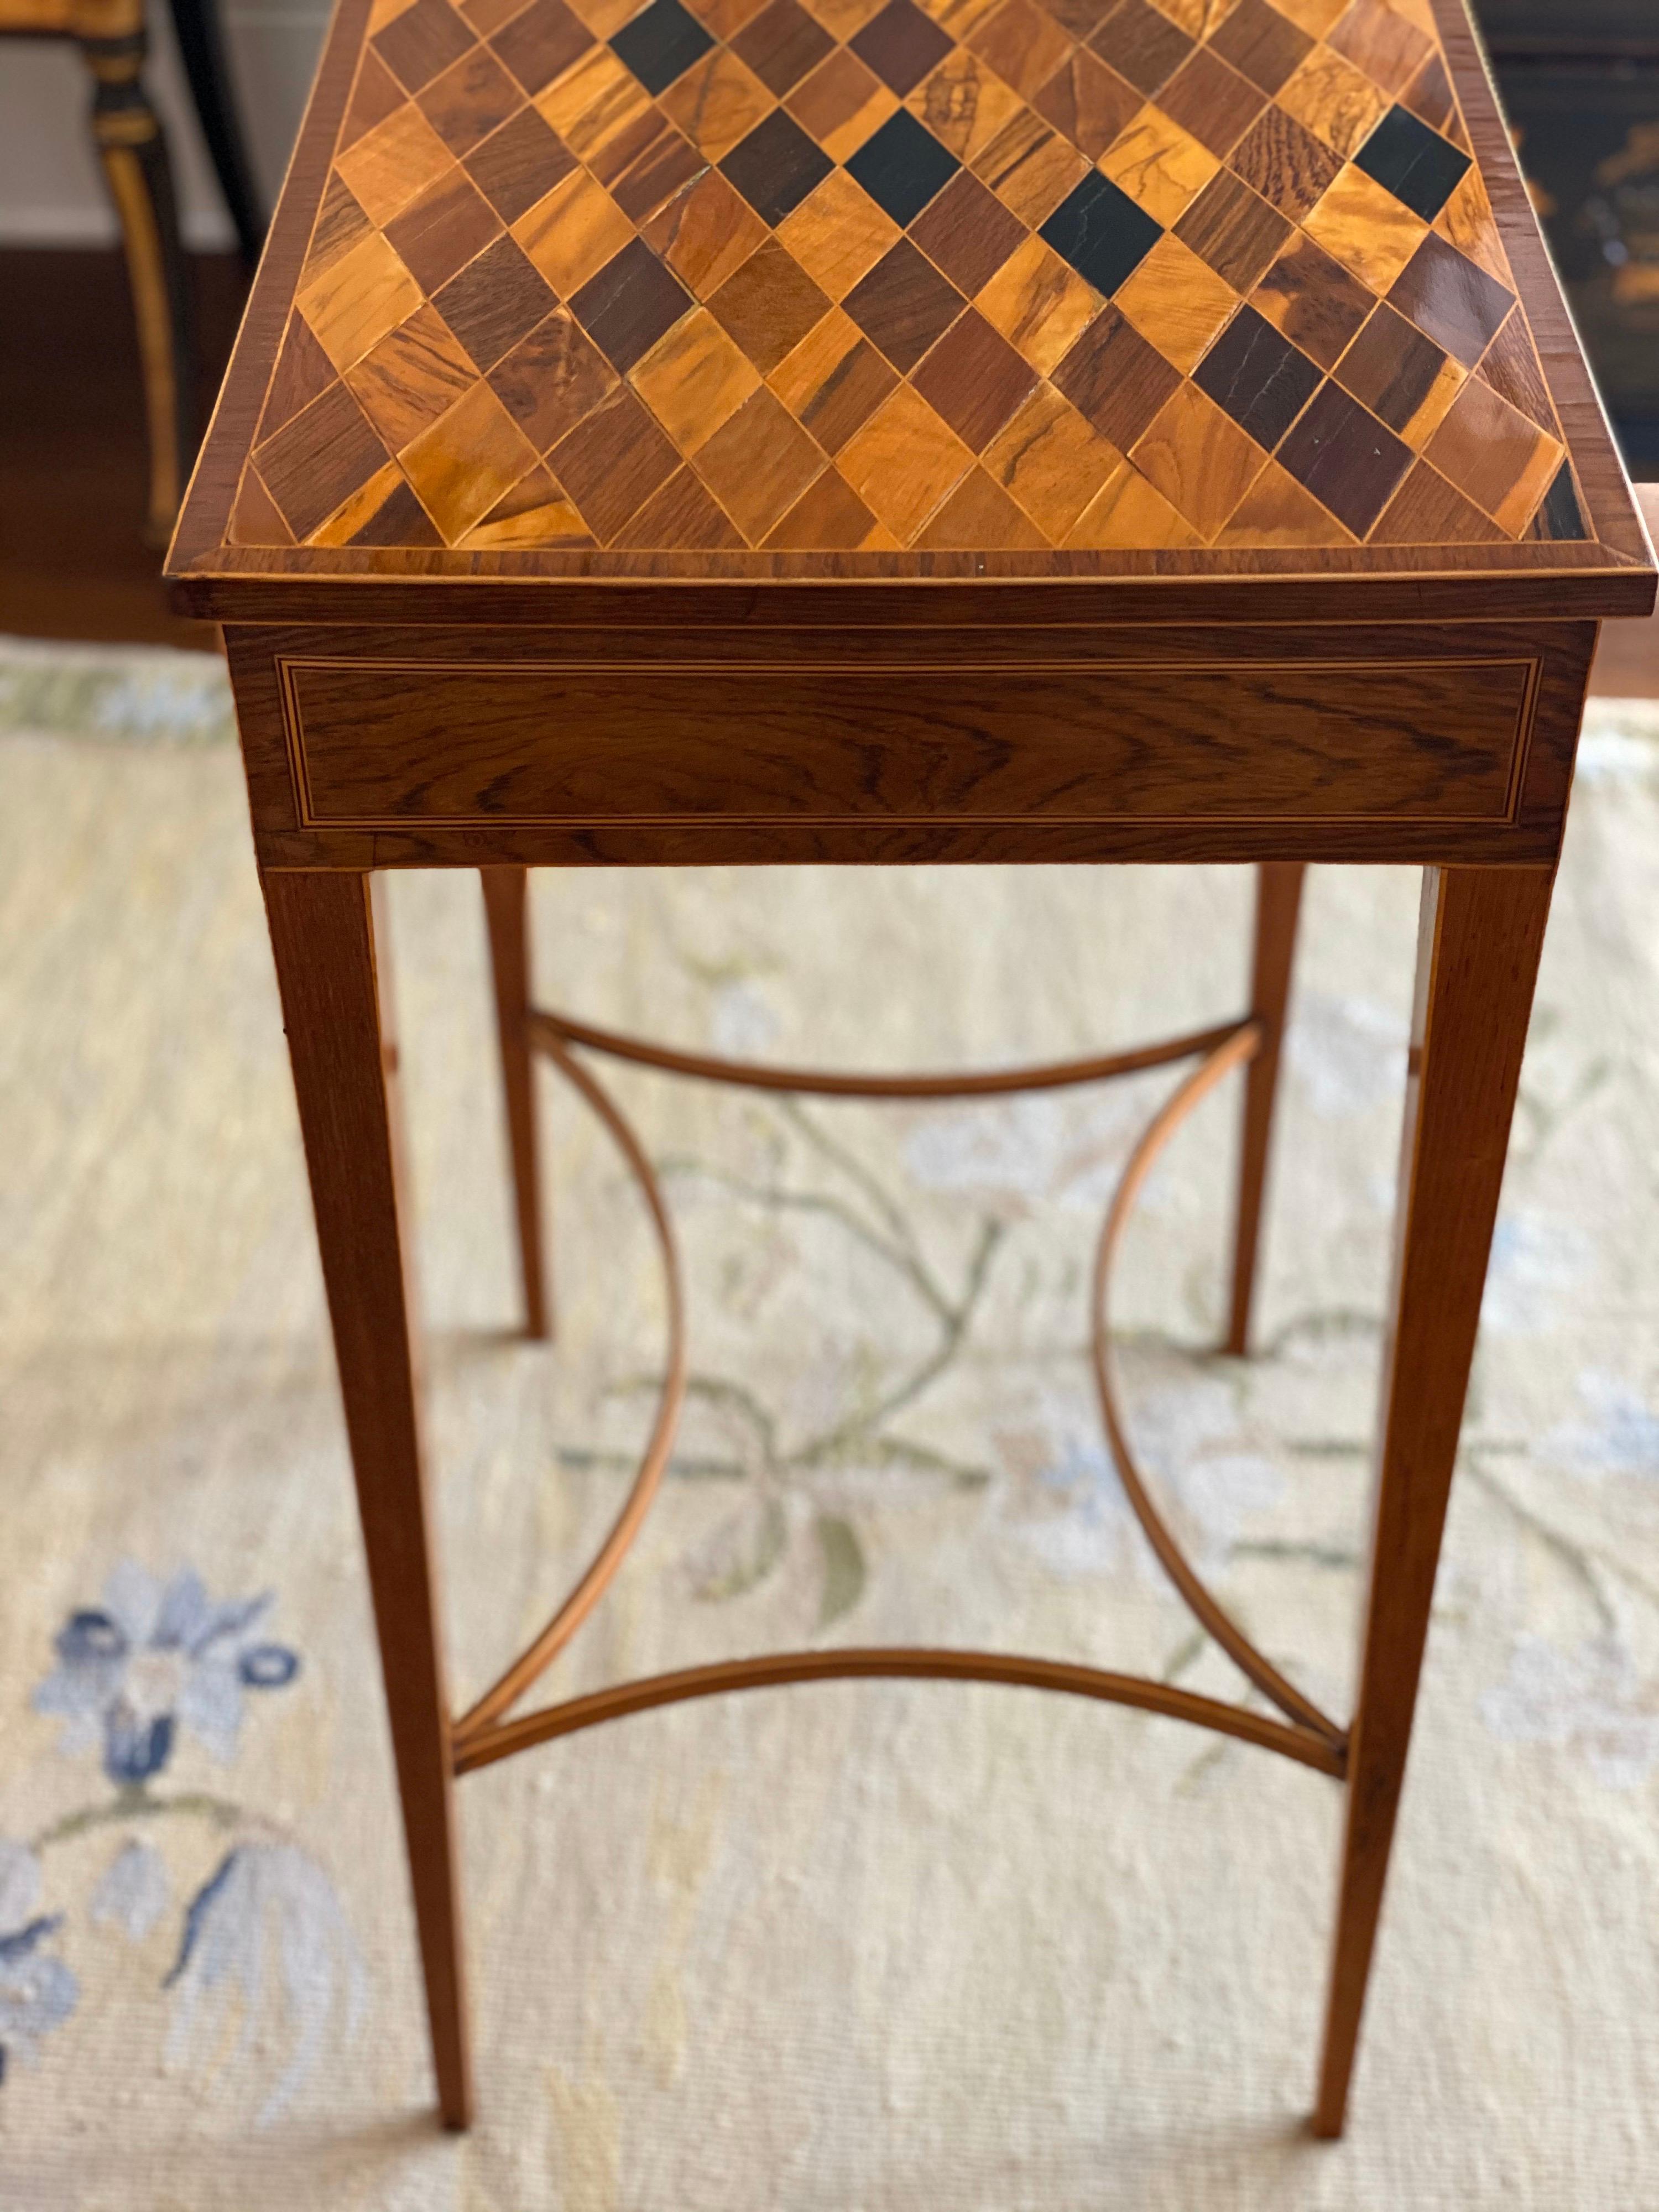 Unusual George III Inlaid Rosewood and Specimen Wood Parquetry Work Table For Sale 2